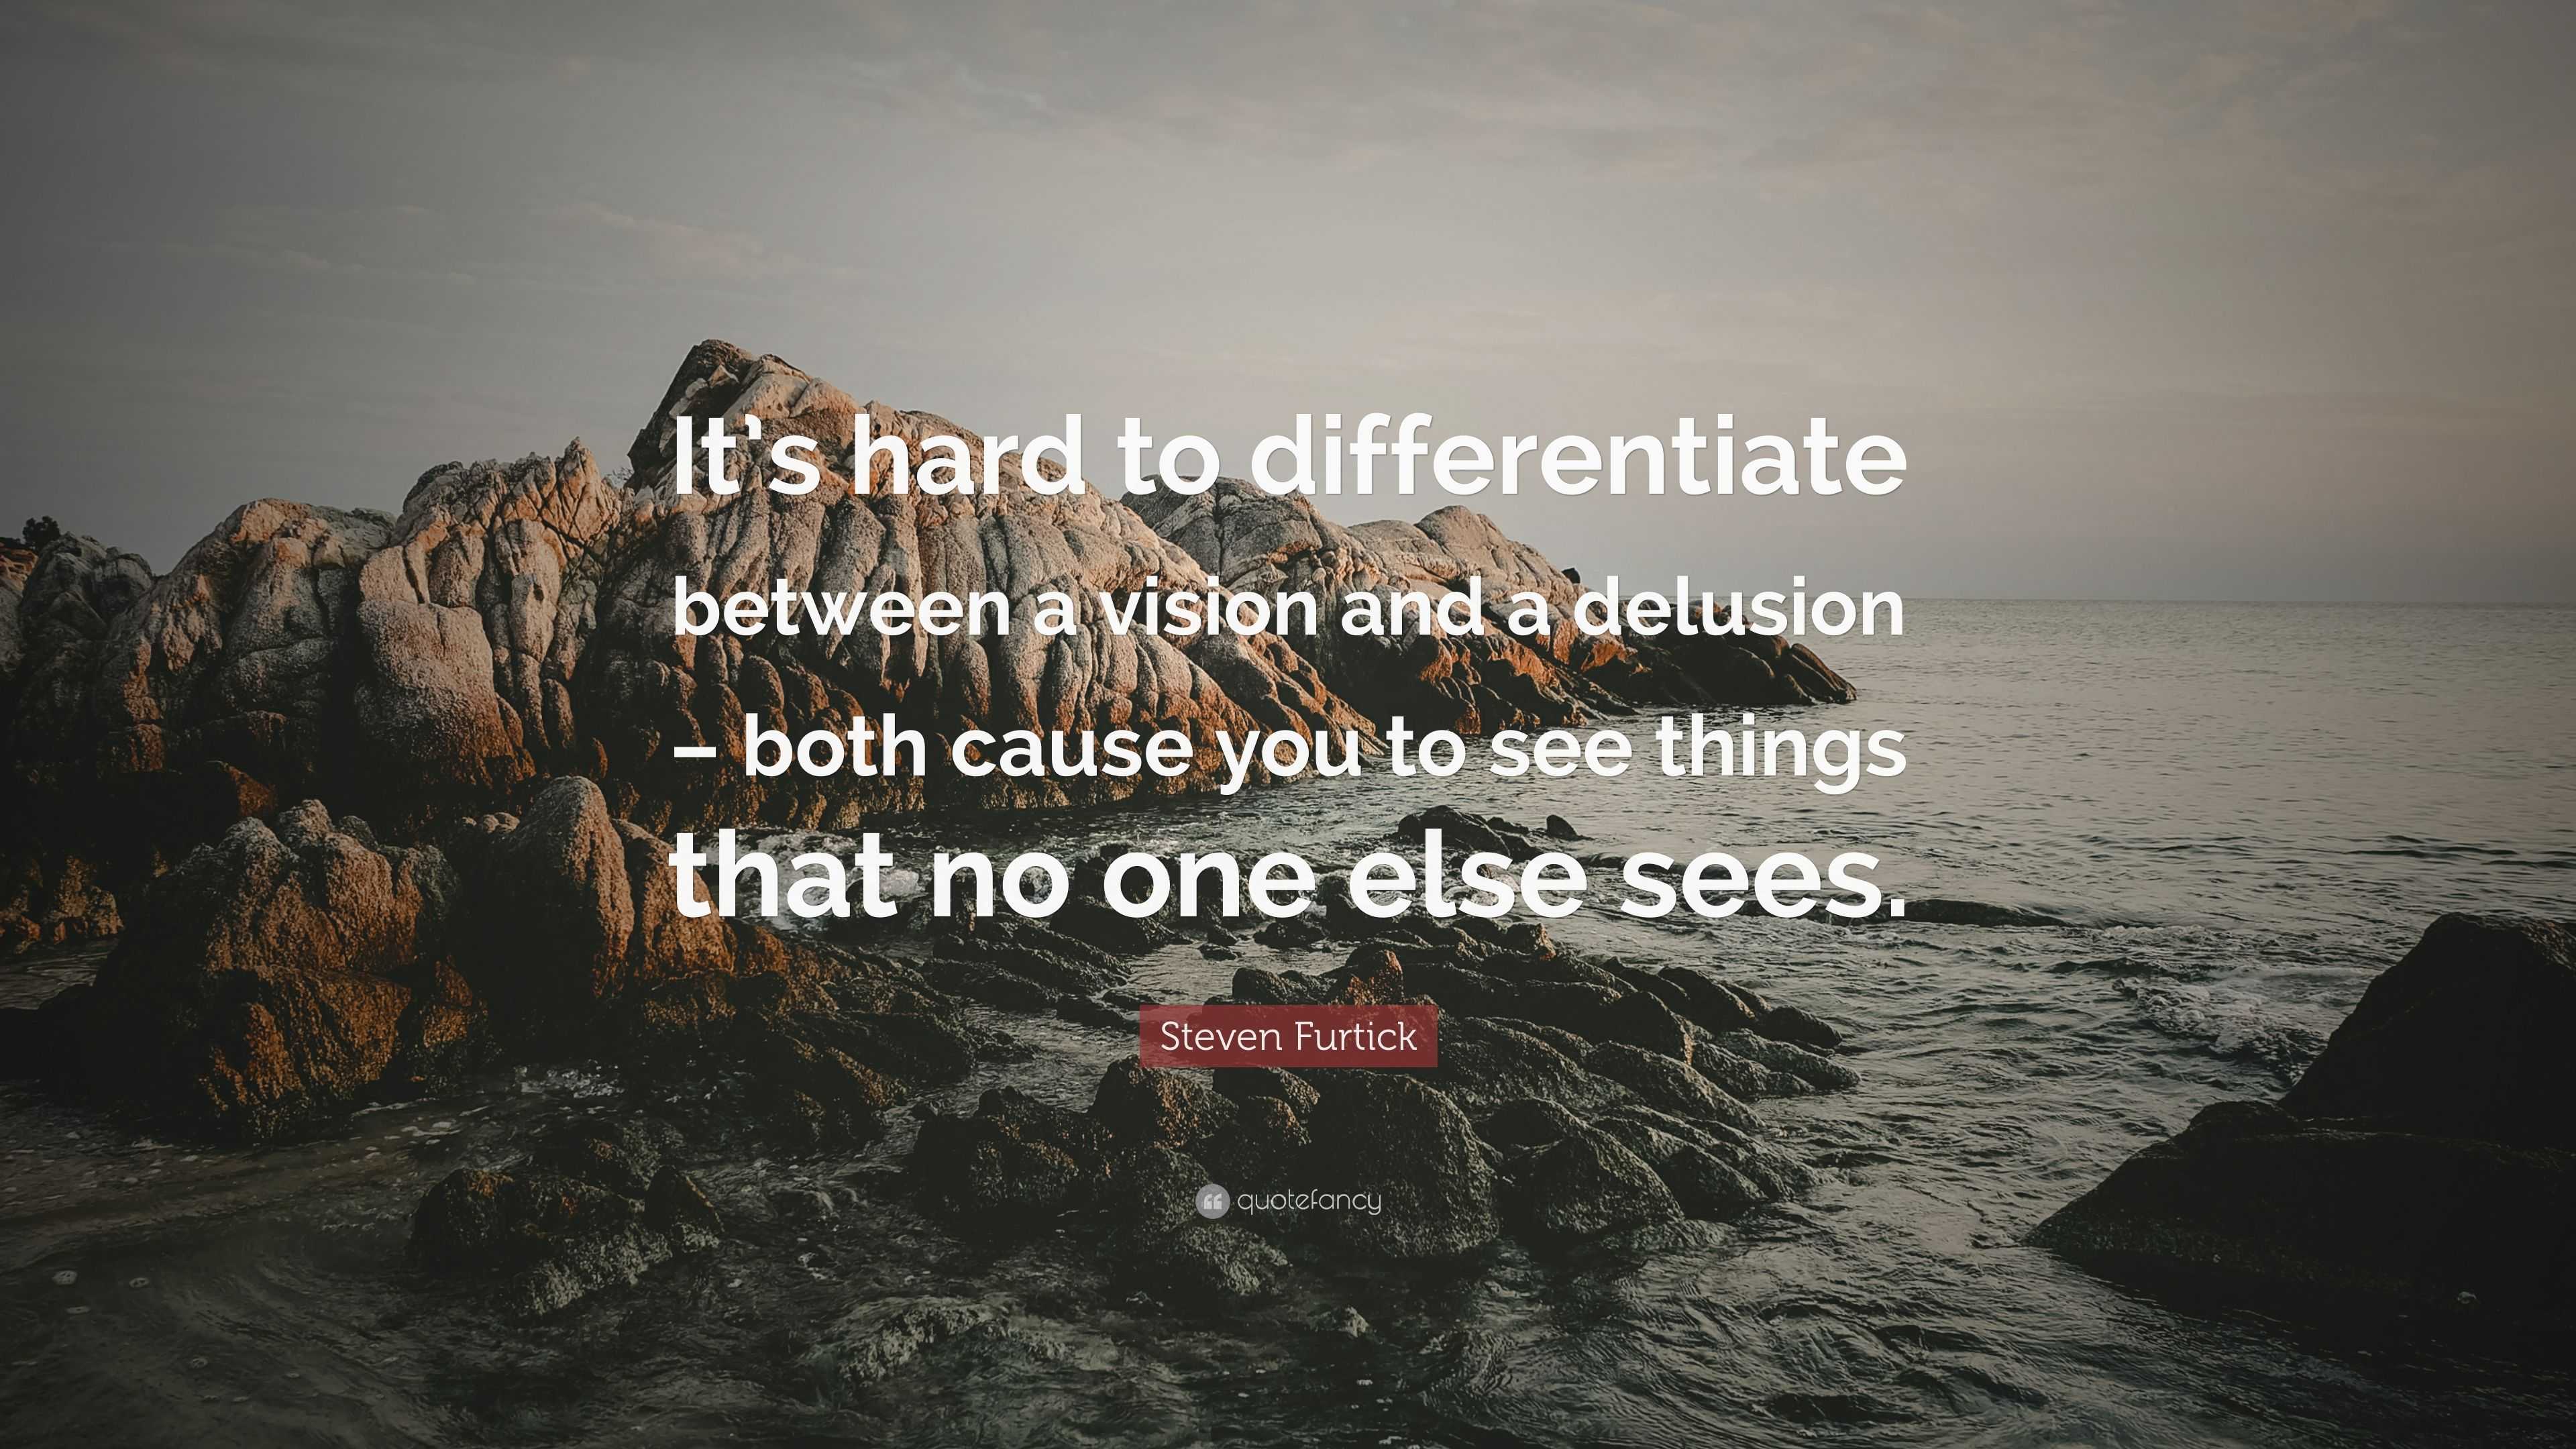 Steven Furtick Quote: “It’s hard to differentiate between a vision and ...